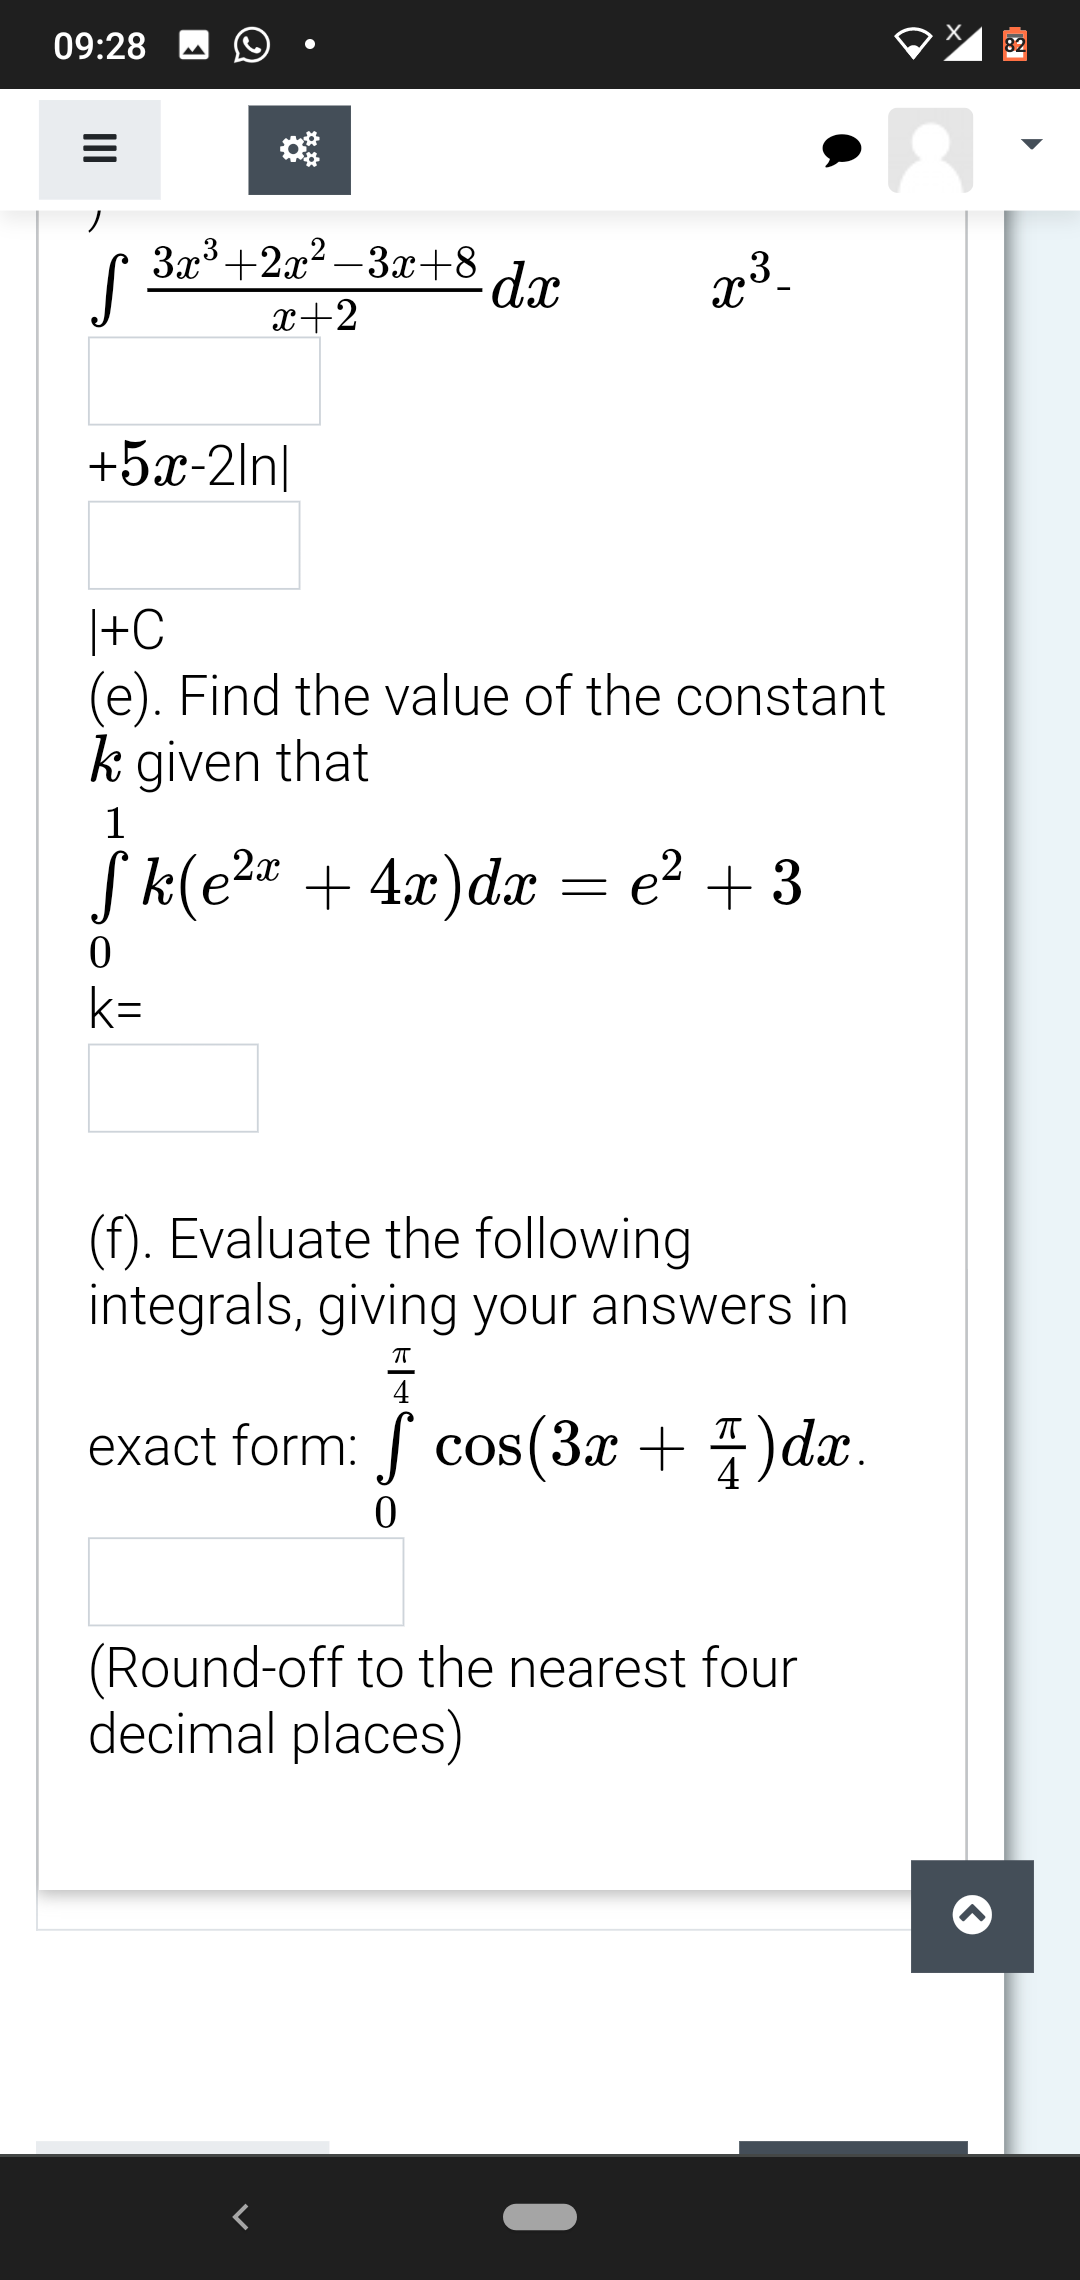 09:28
82
3x3+2x?-3x+8 dr
S
x+2
+5x-2ln|
|+C
(e). Find the value of the constant
k given that
1
,2x
Sk(e2 + 4x)d = e² + 3
k=
(f). Evaluate the following
integrals, giving your answers in
4
exact form: cos(3x + 4)dx.
(Round-off to the nearest four
decimal places)
II
